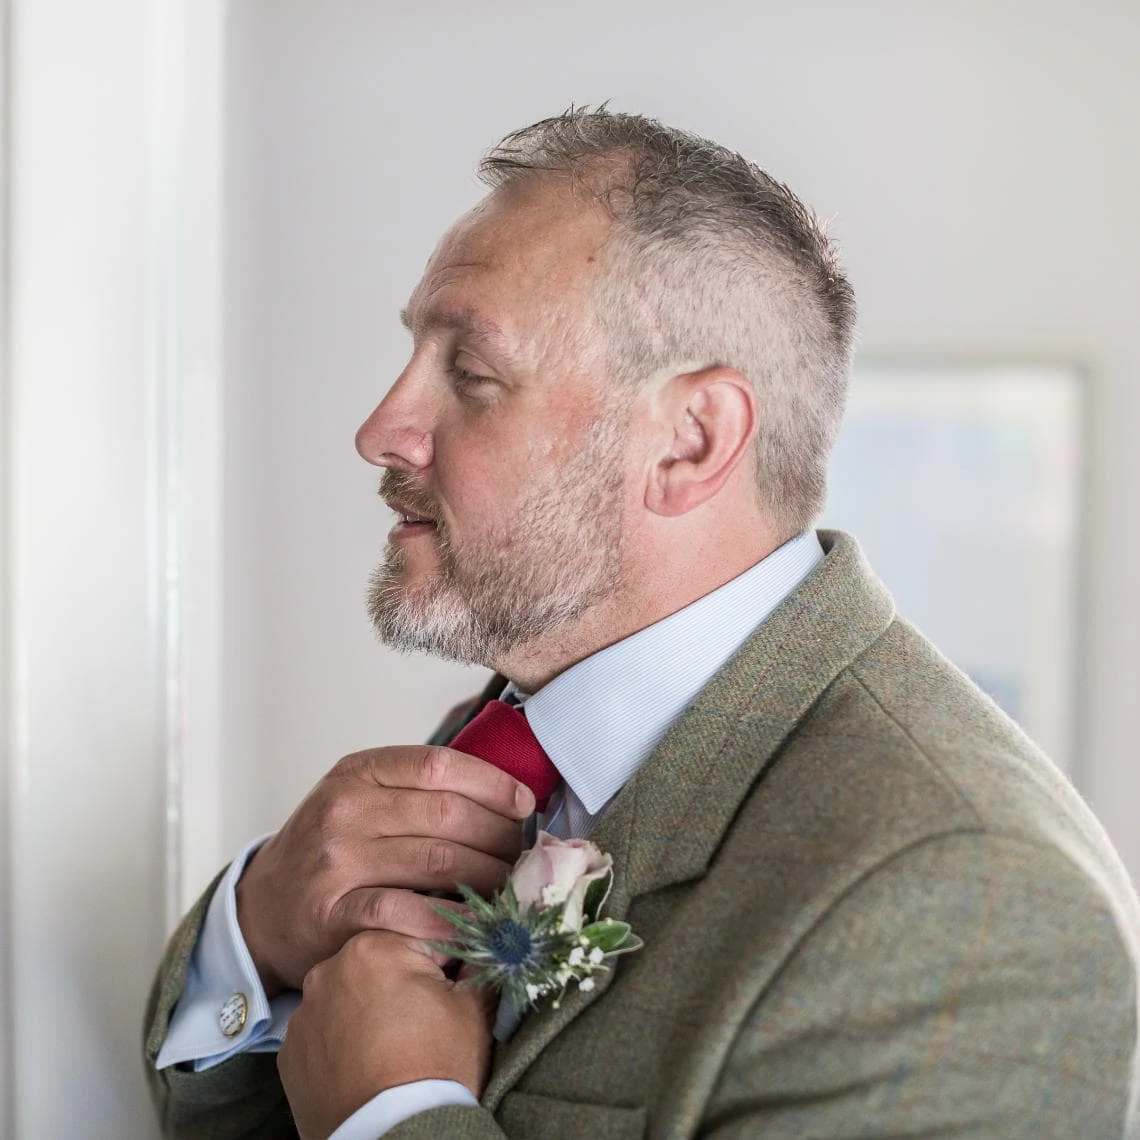 profile of groom sorting his tie in front of mirror